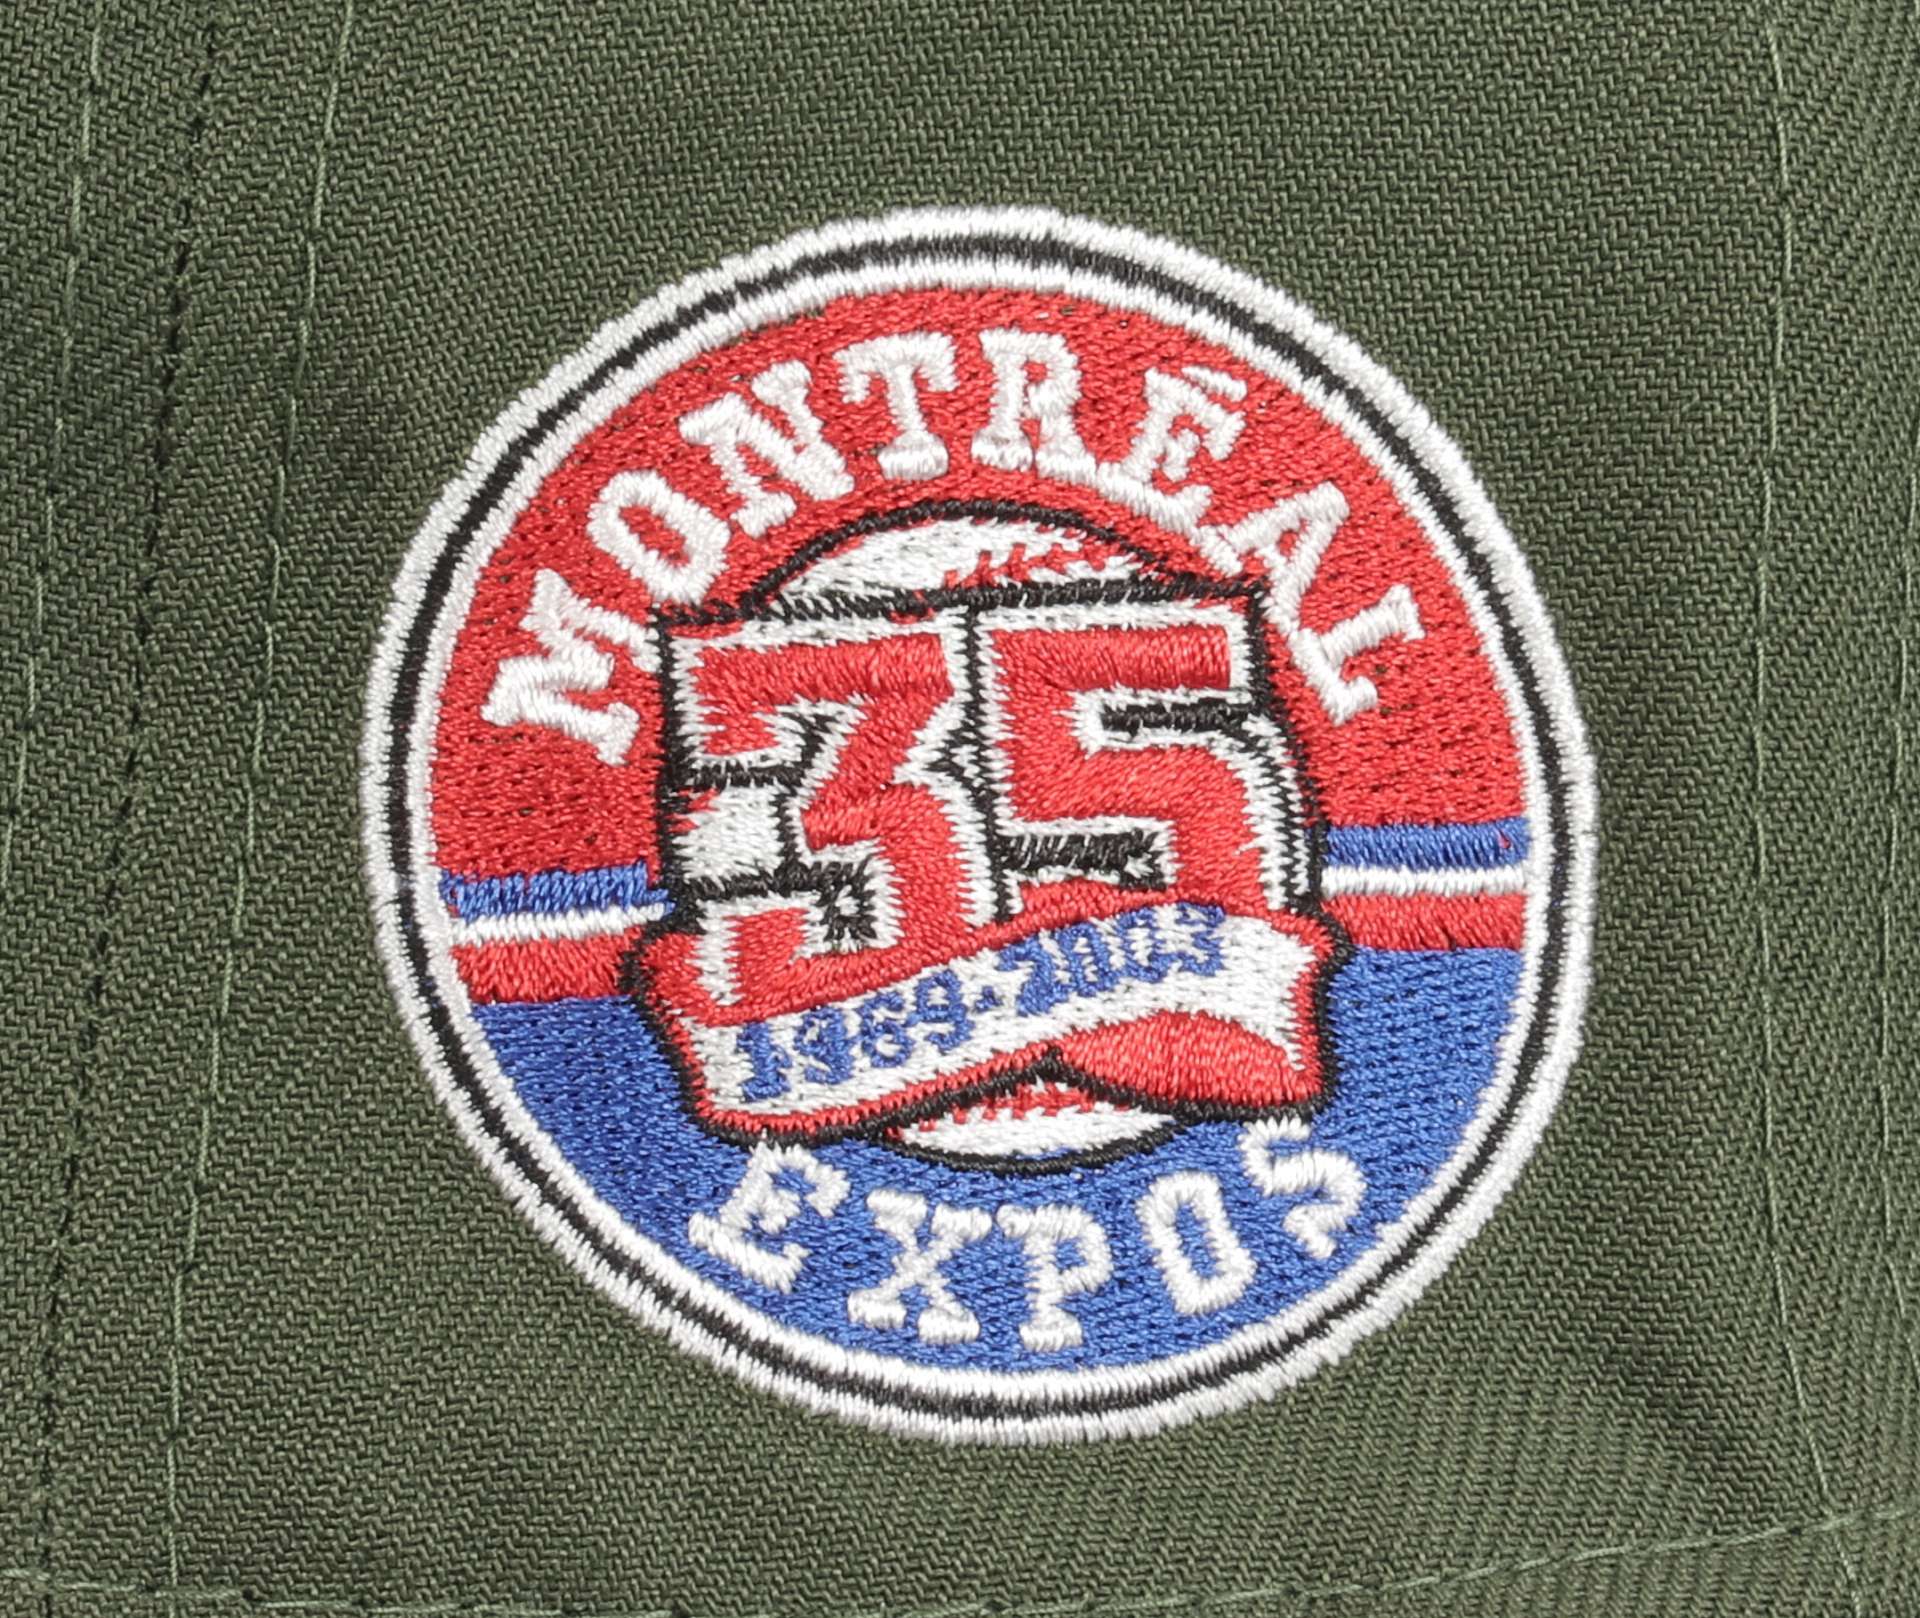 Montreal Expos MLB Cooperstown 35th Anniversary Sidepatch Rifle Green 59Fifty Basecap New Era